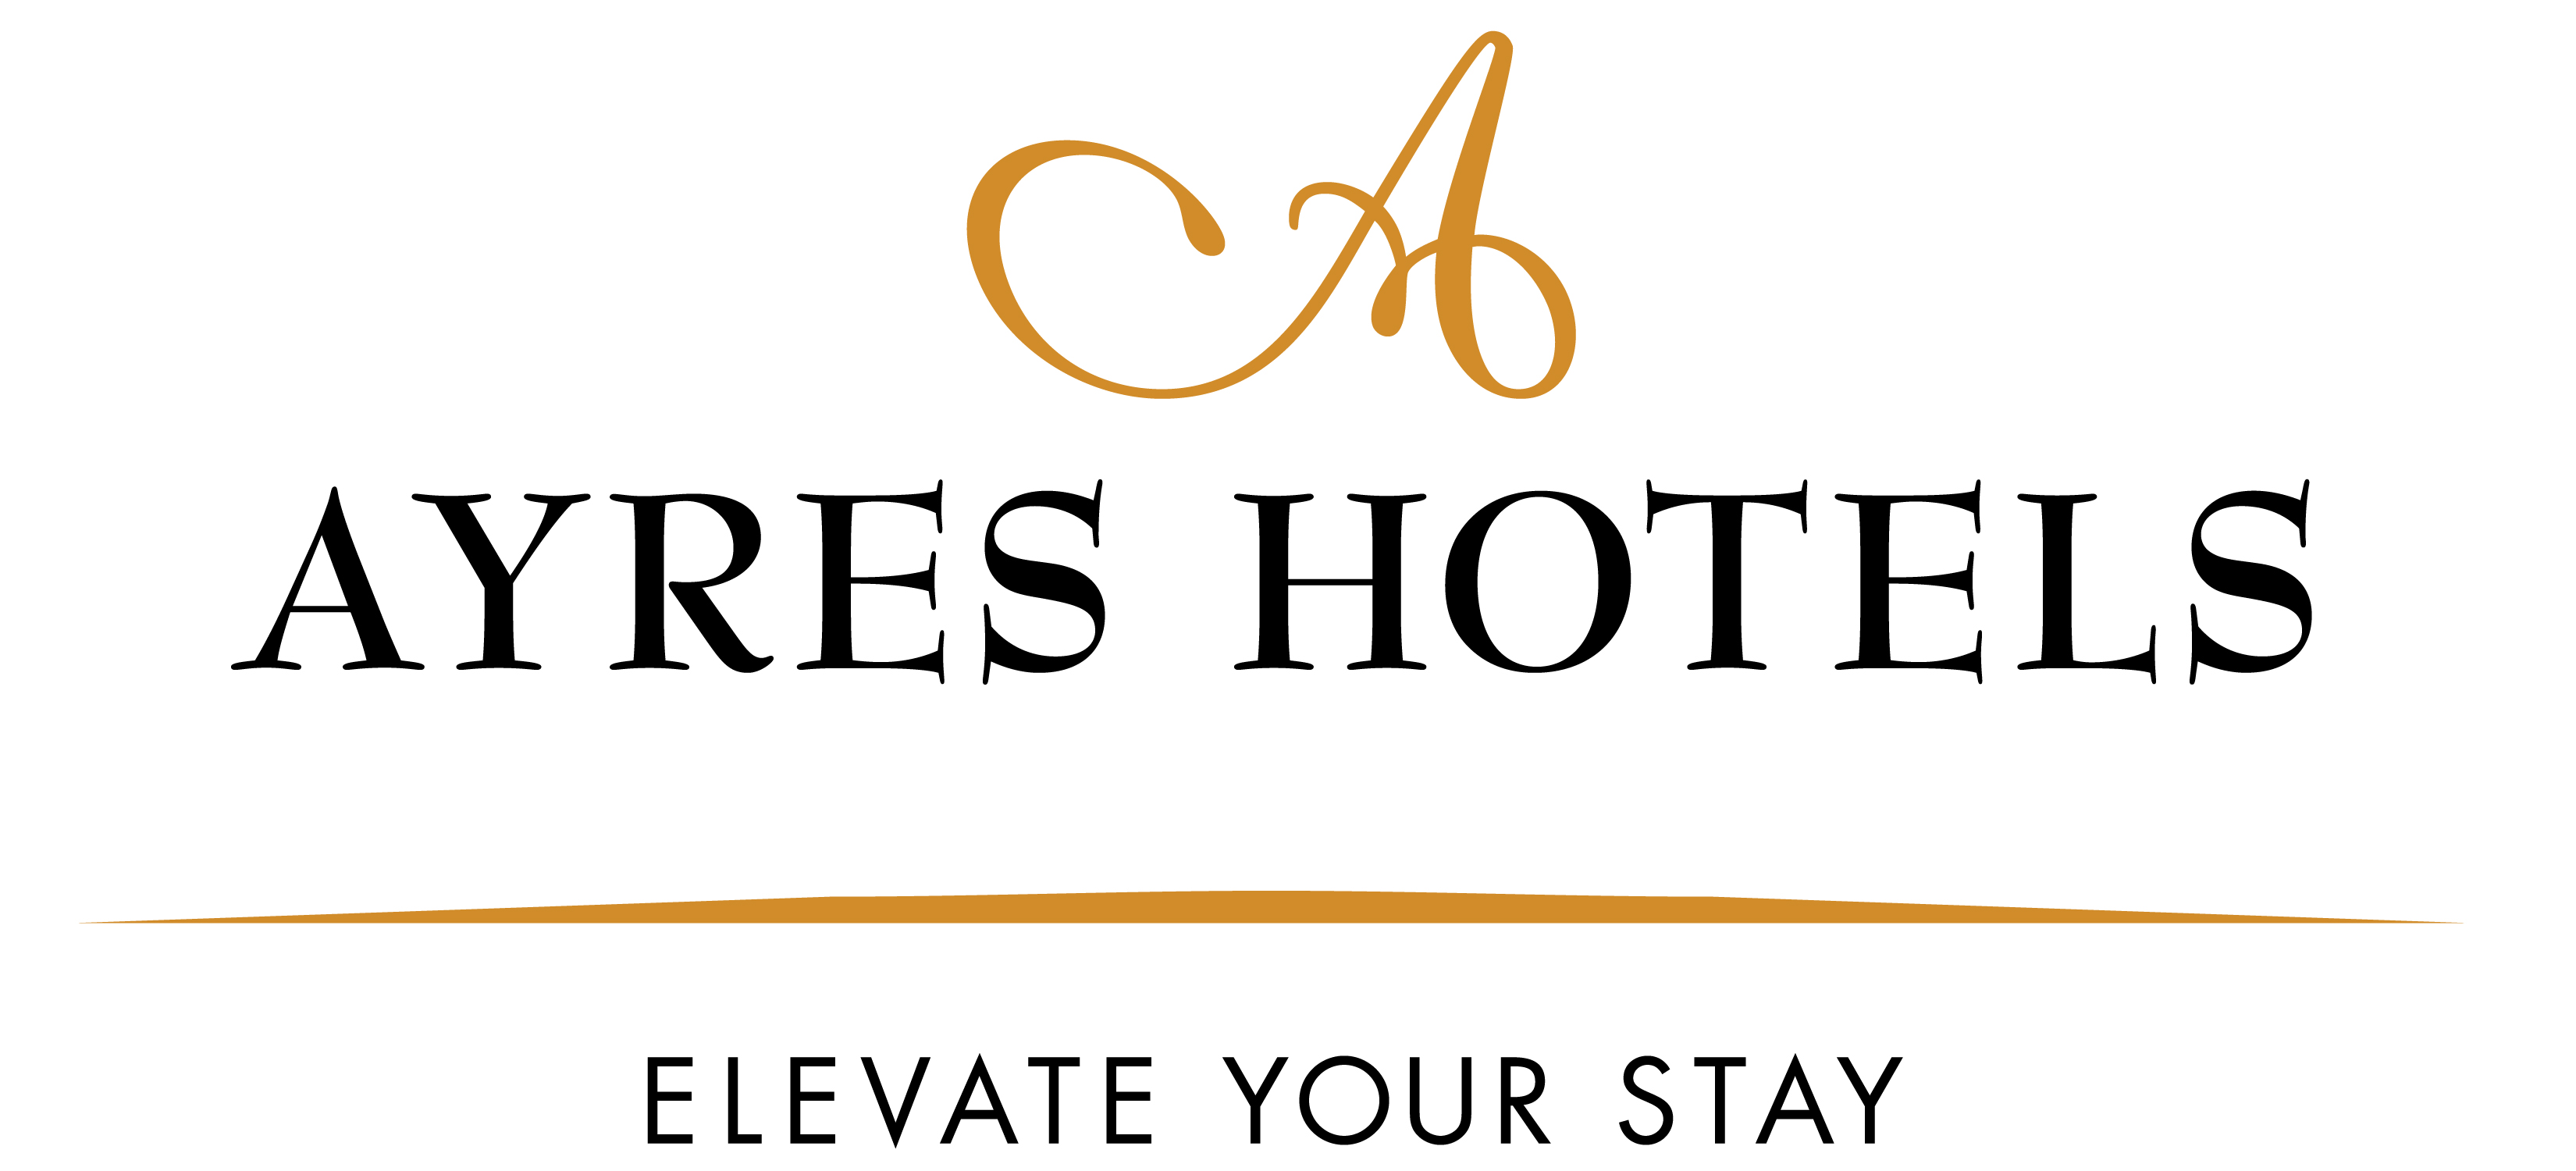 Ayres Hotels Unveils New Brand Message and Logo